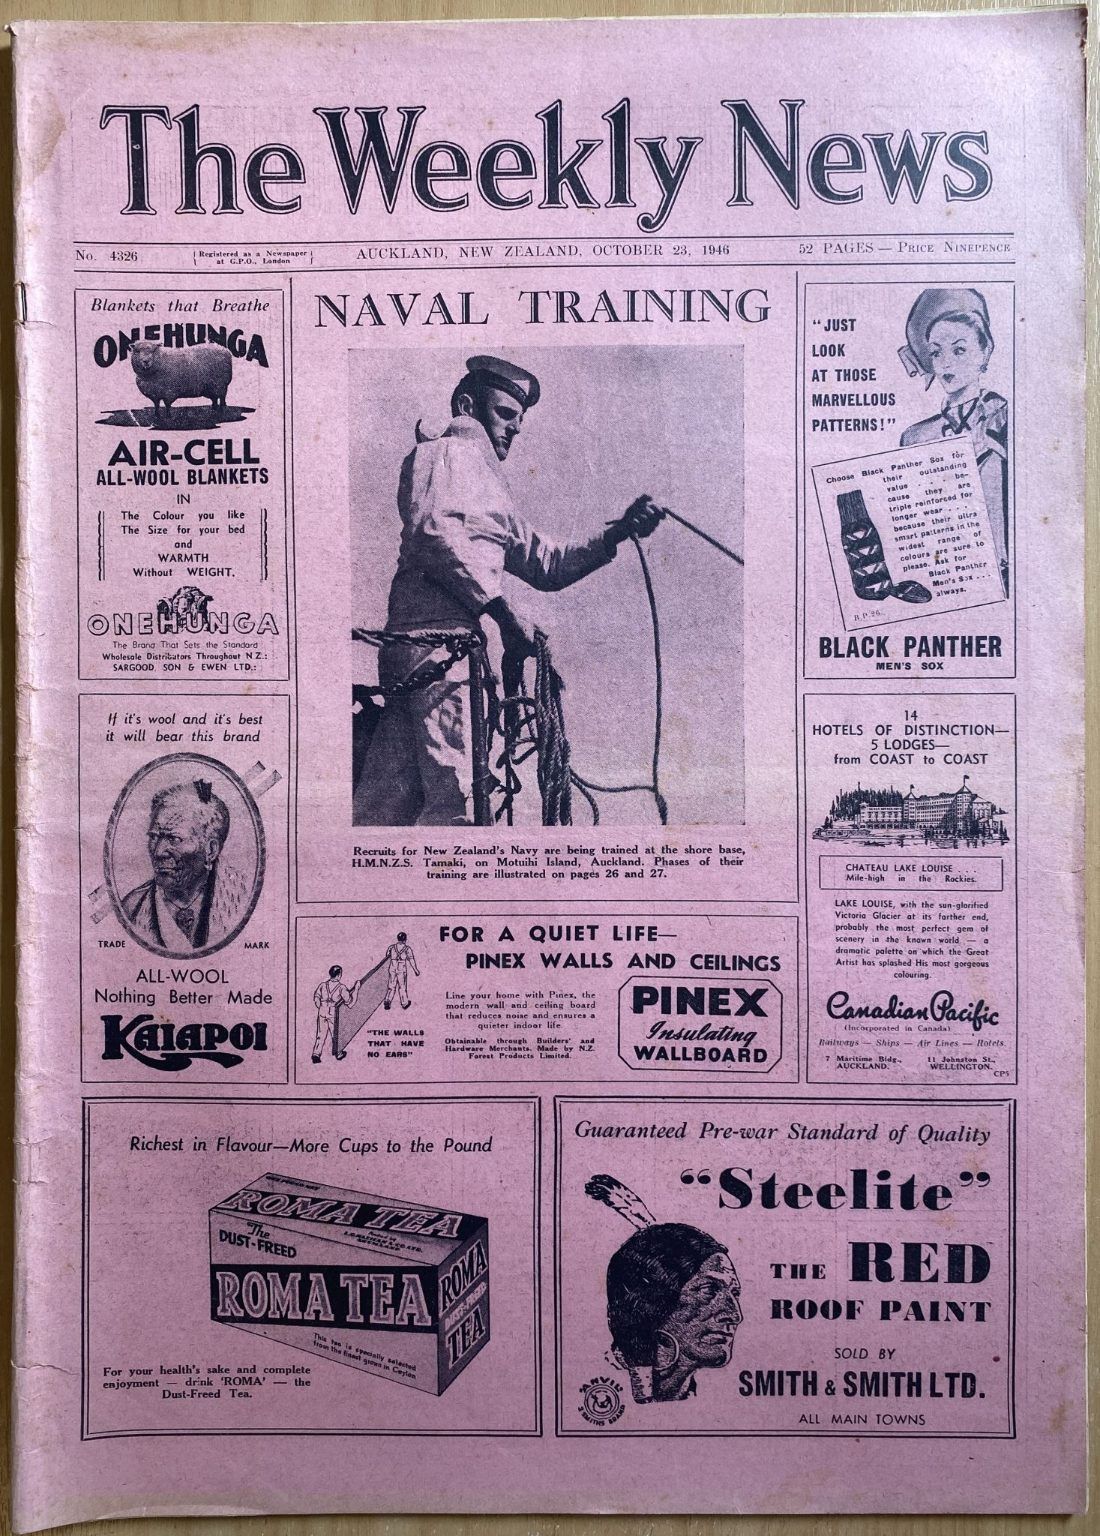 OLD NEWSPAPER: The Weekly News - No. 4318, 28 August 1946